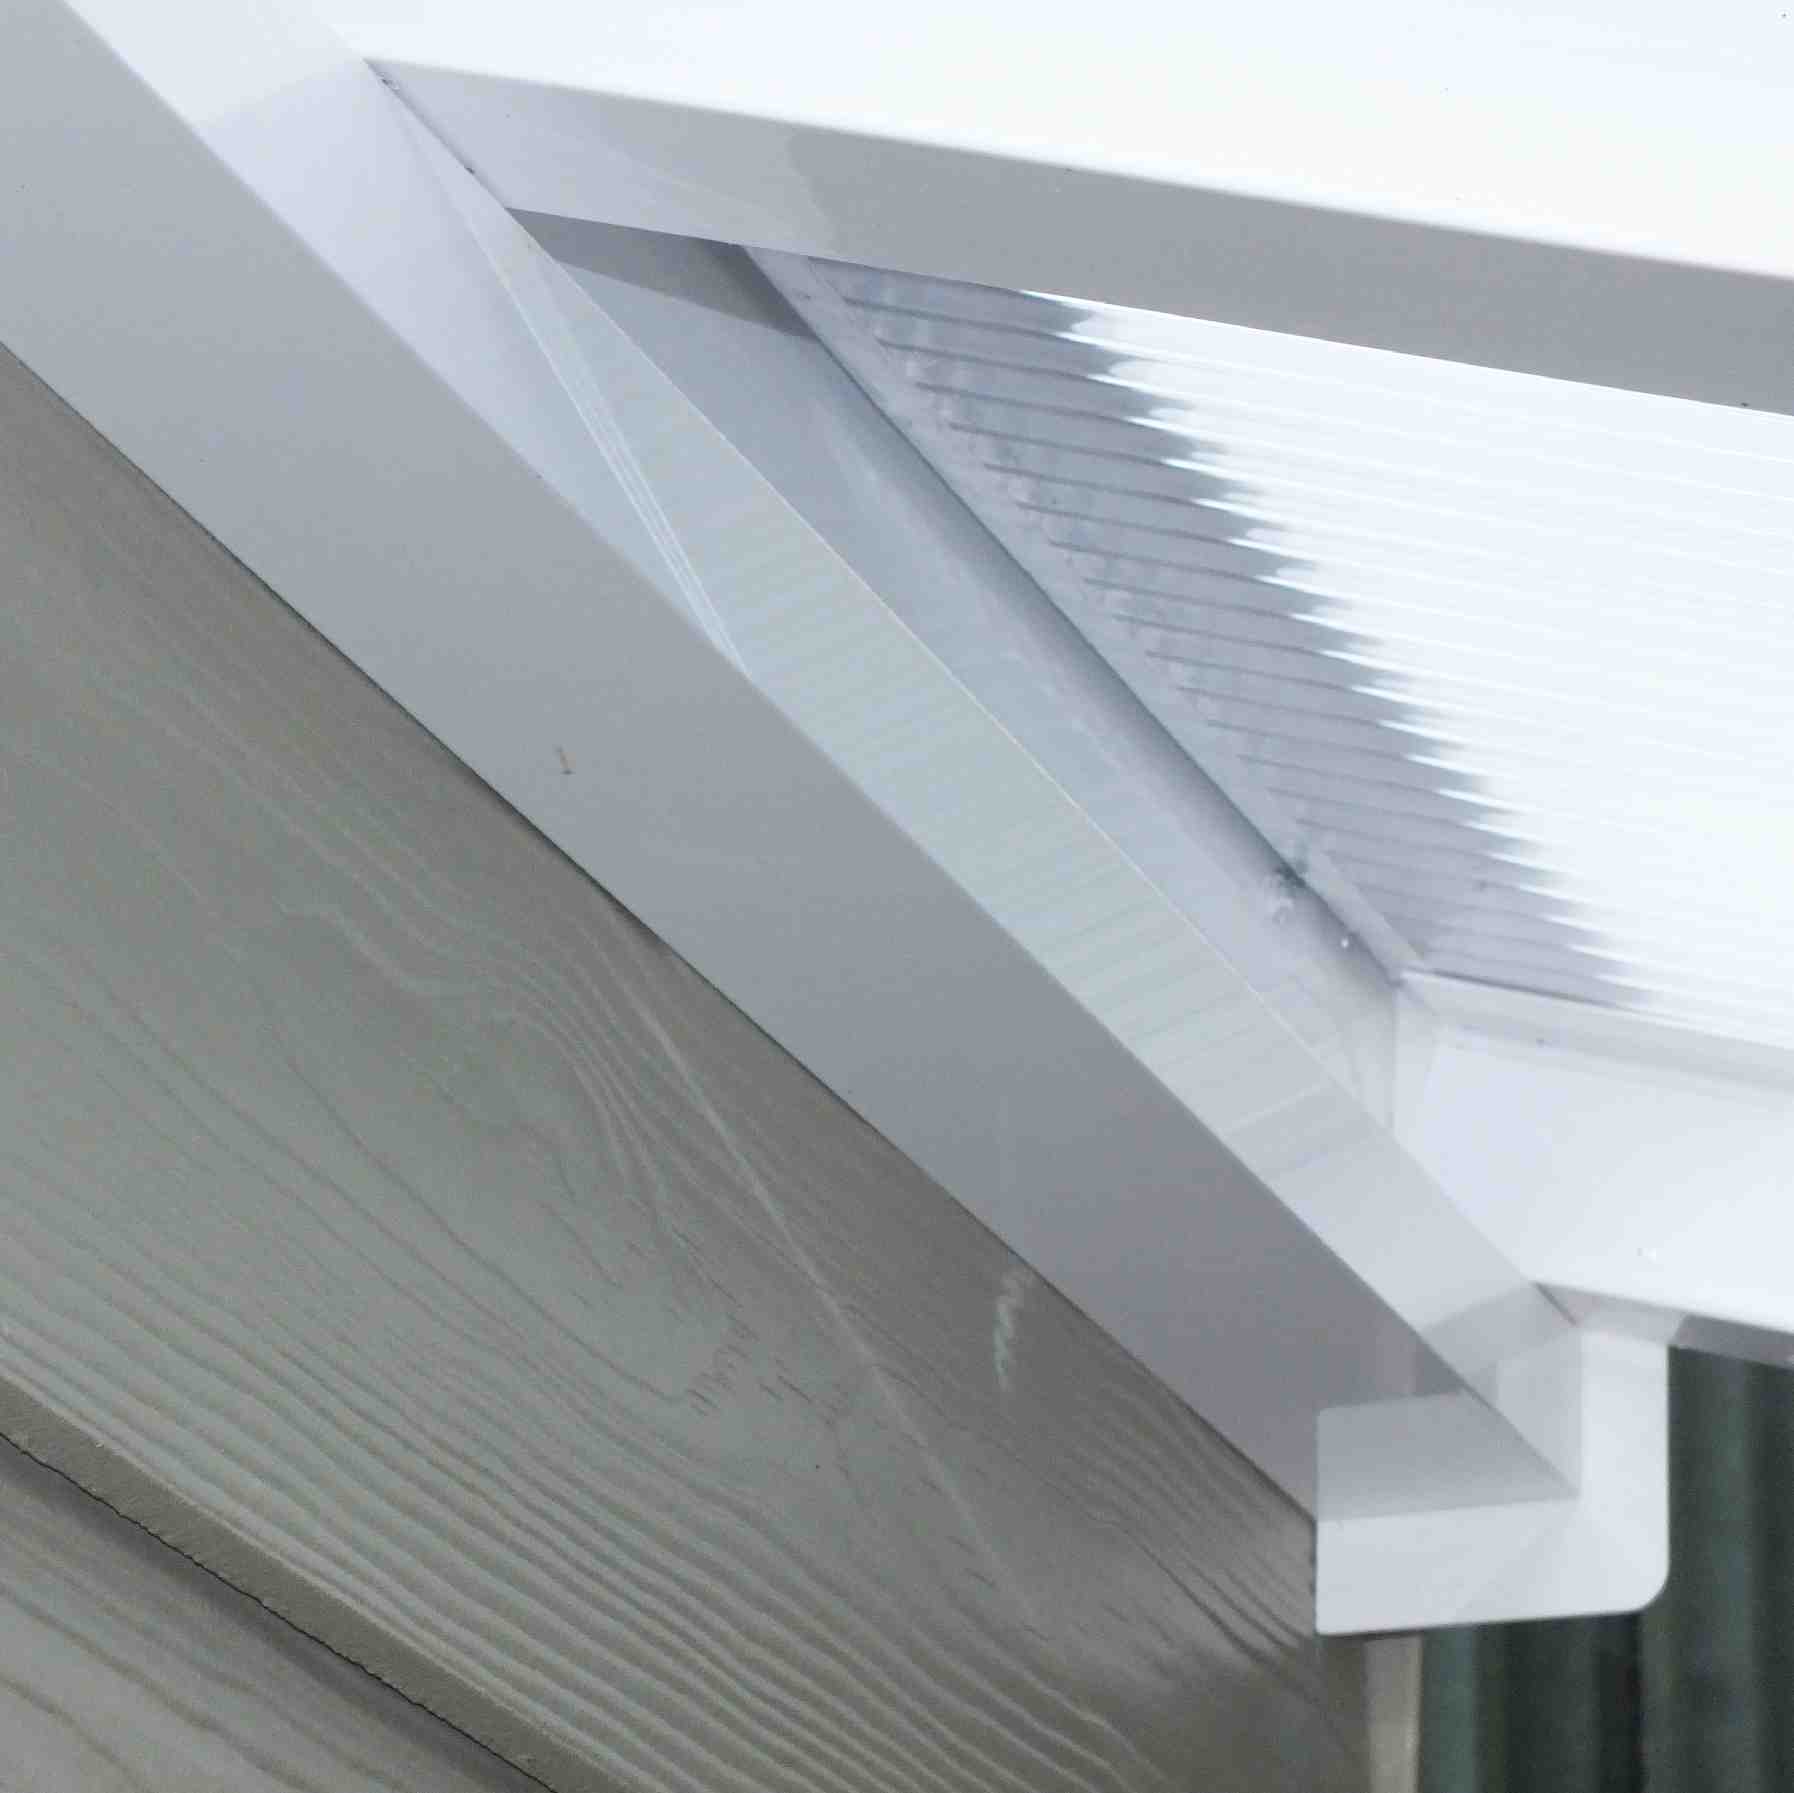 Great deals on Omega Verandah White with 6mm Glass Clear Plate Polycarbonate Glazing - 8.4m (W) x 2.0m (P), (4) Supporting Posts